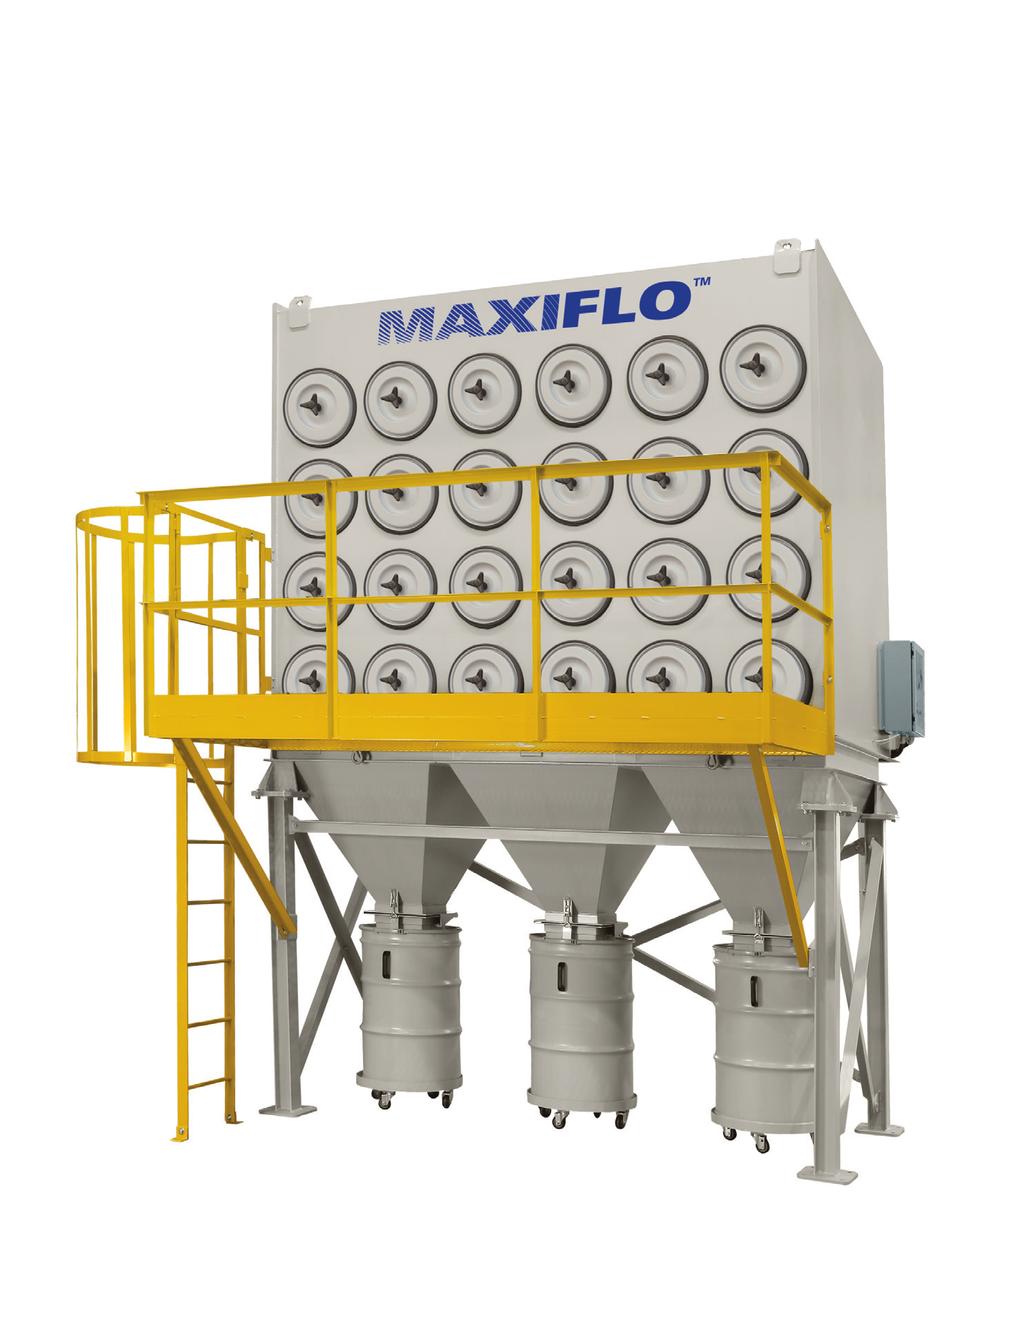 MAXIFLO dust collector is a horizontal down flow type dust